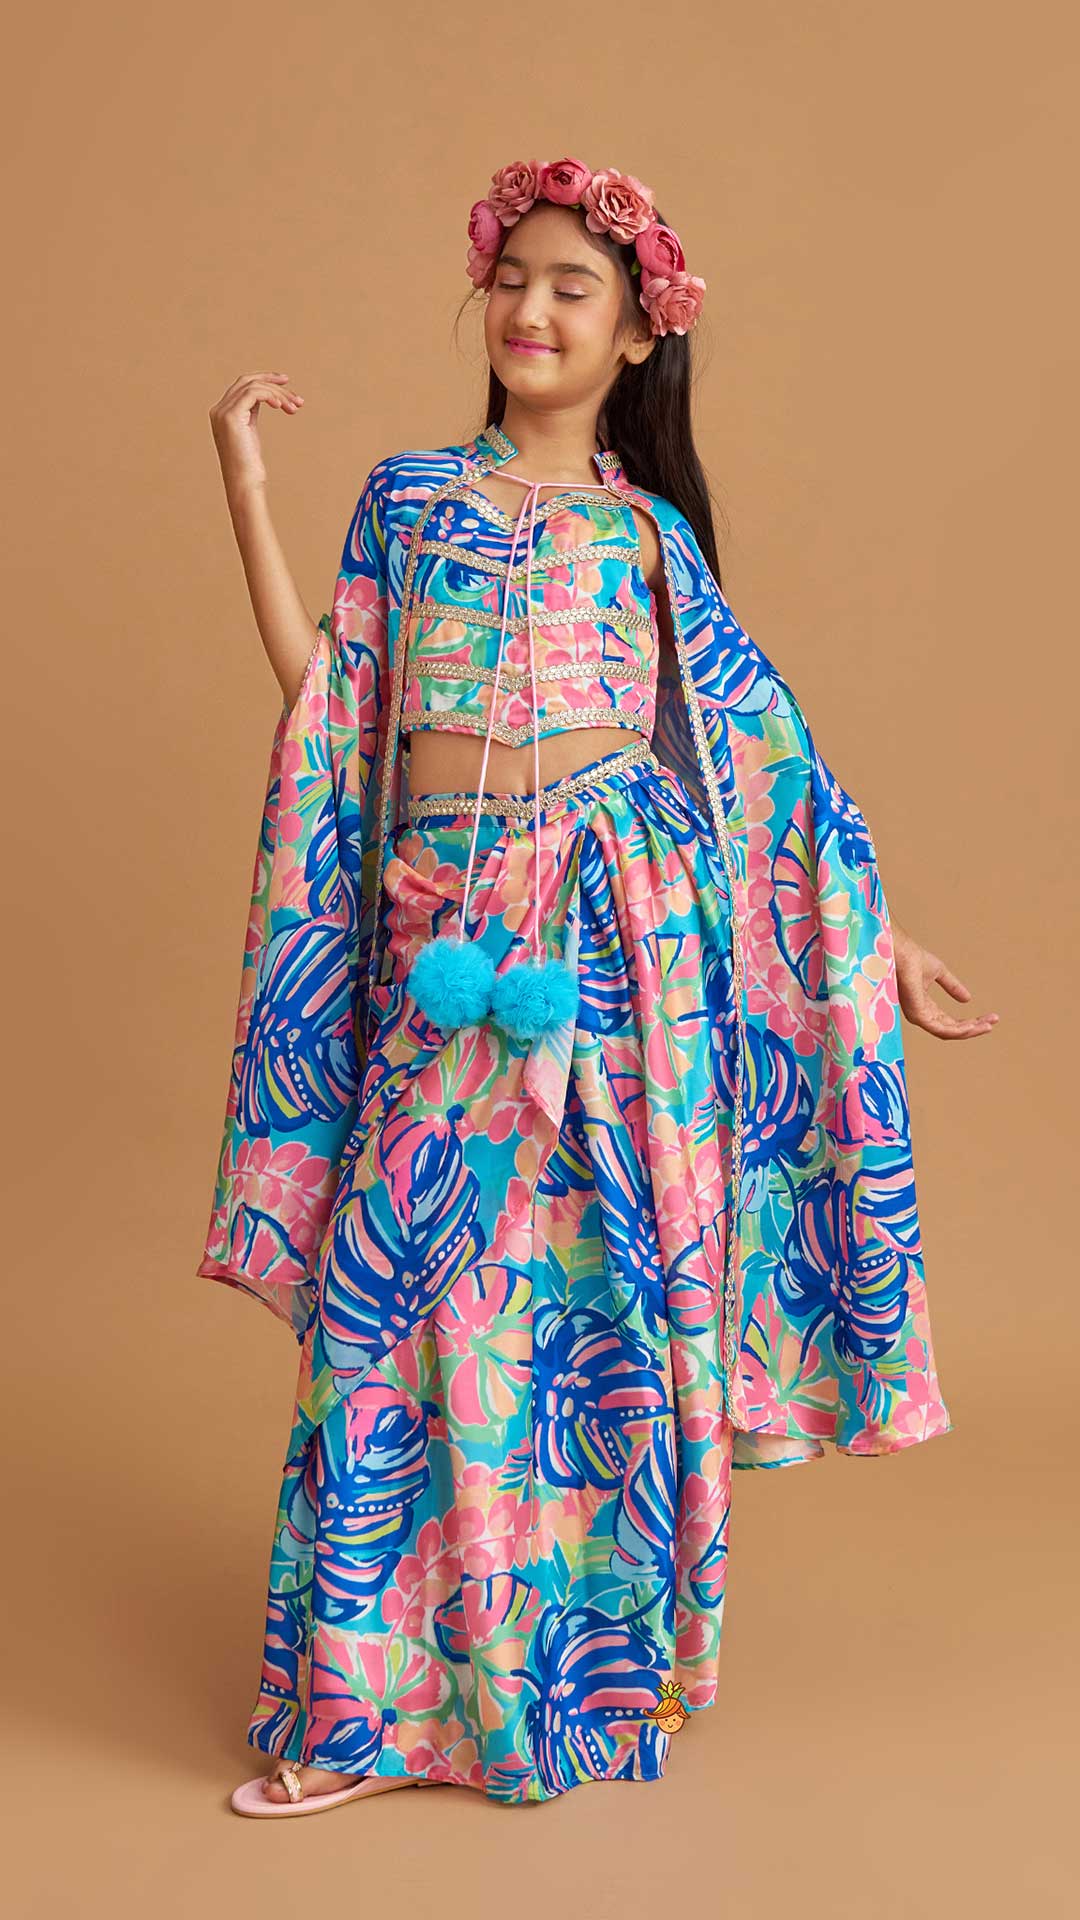 Multicolour Printed Lace Work Top With Cape And Dhoti Style Skirt